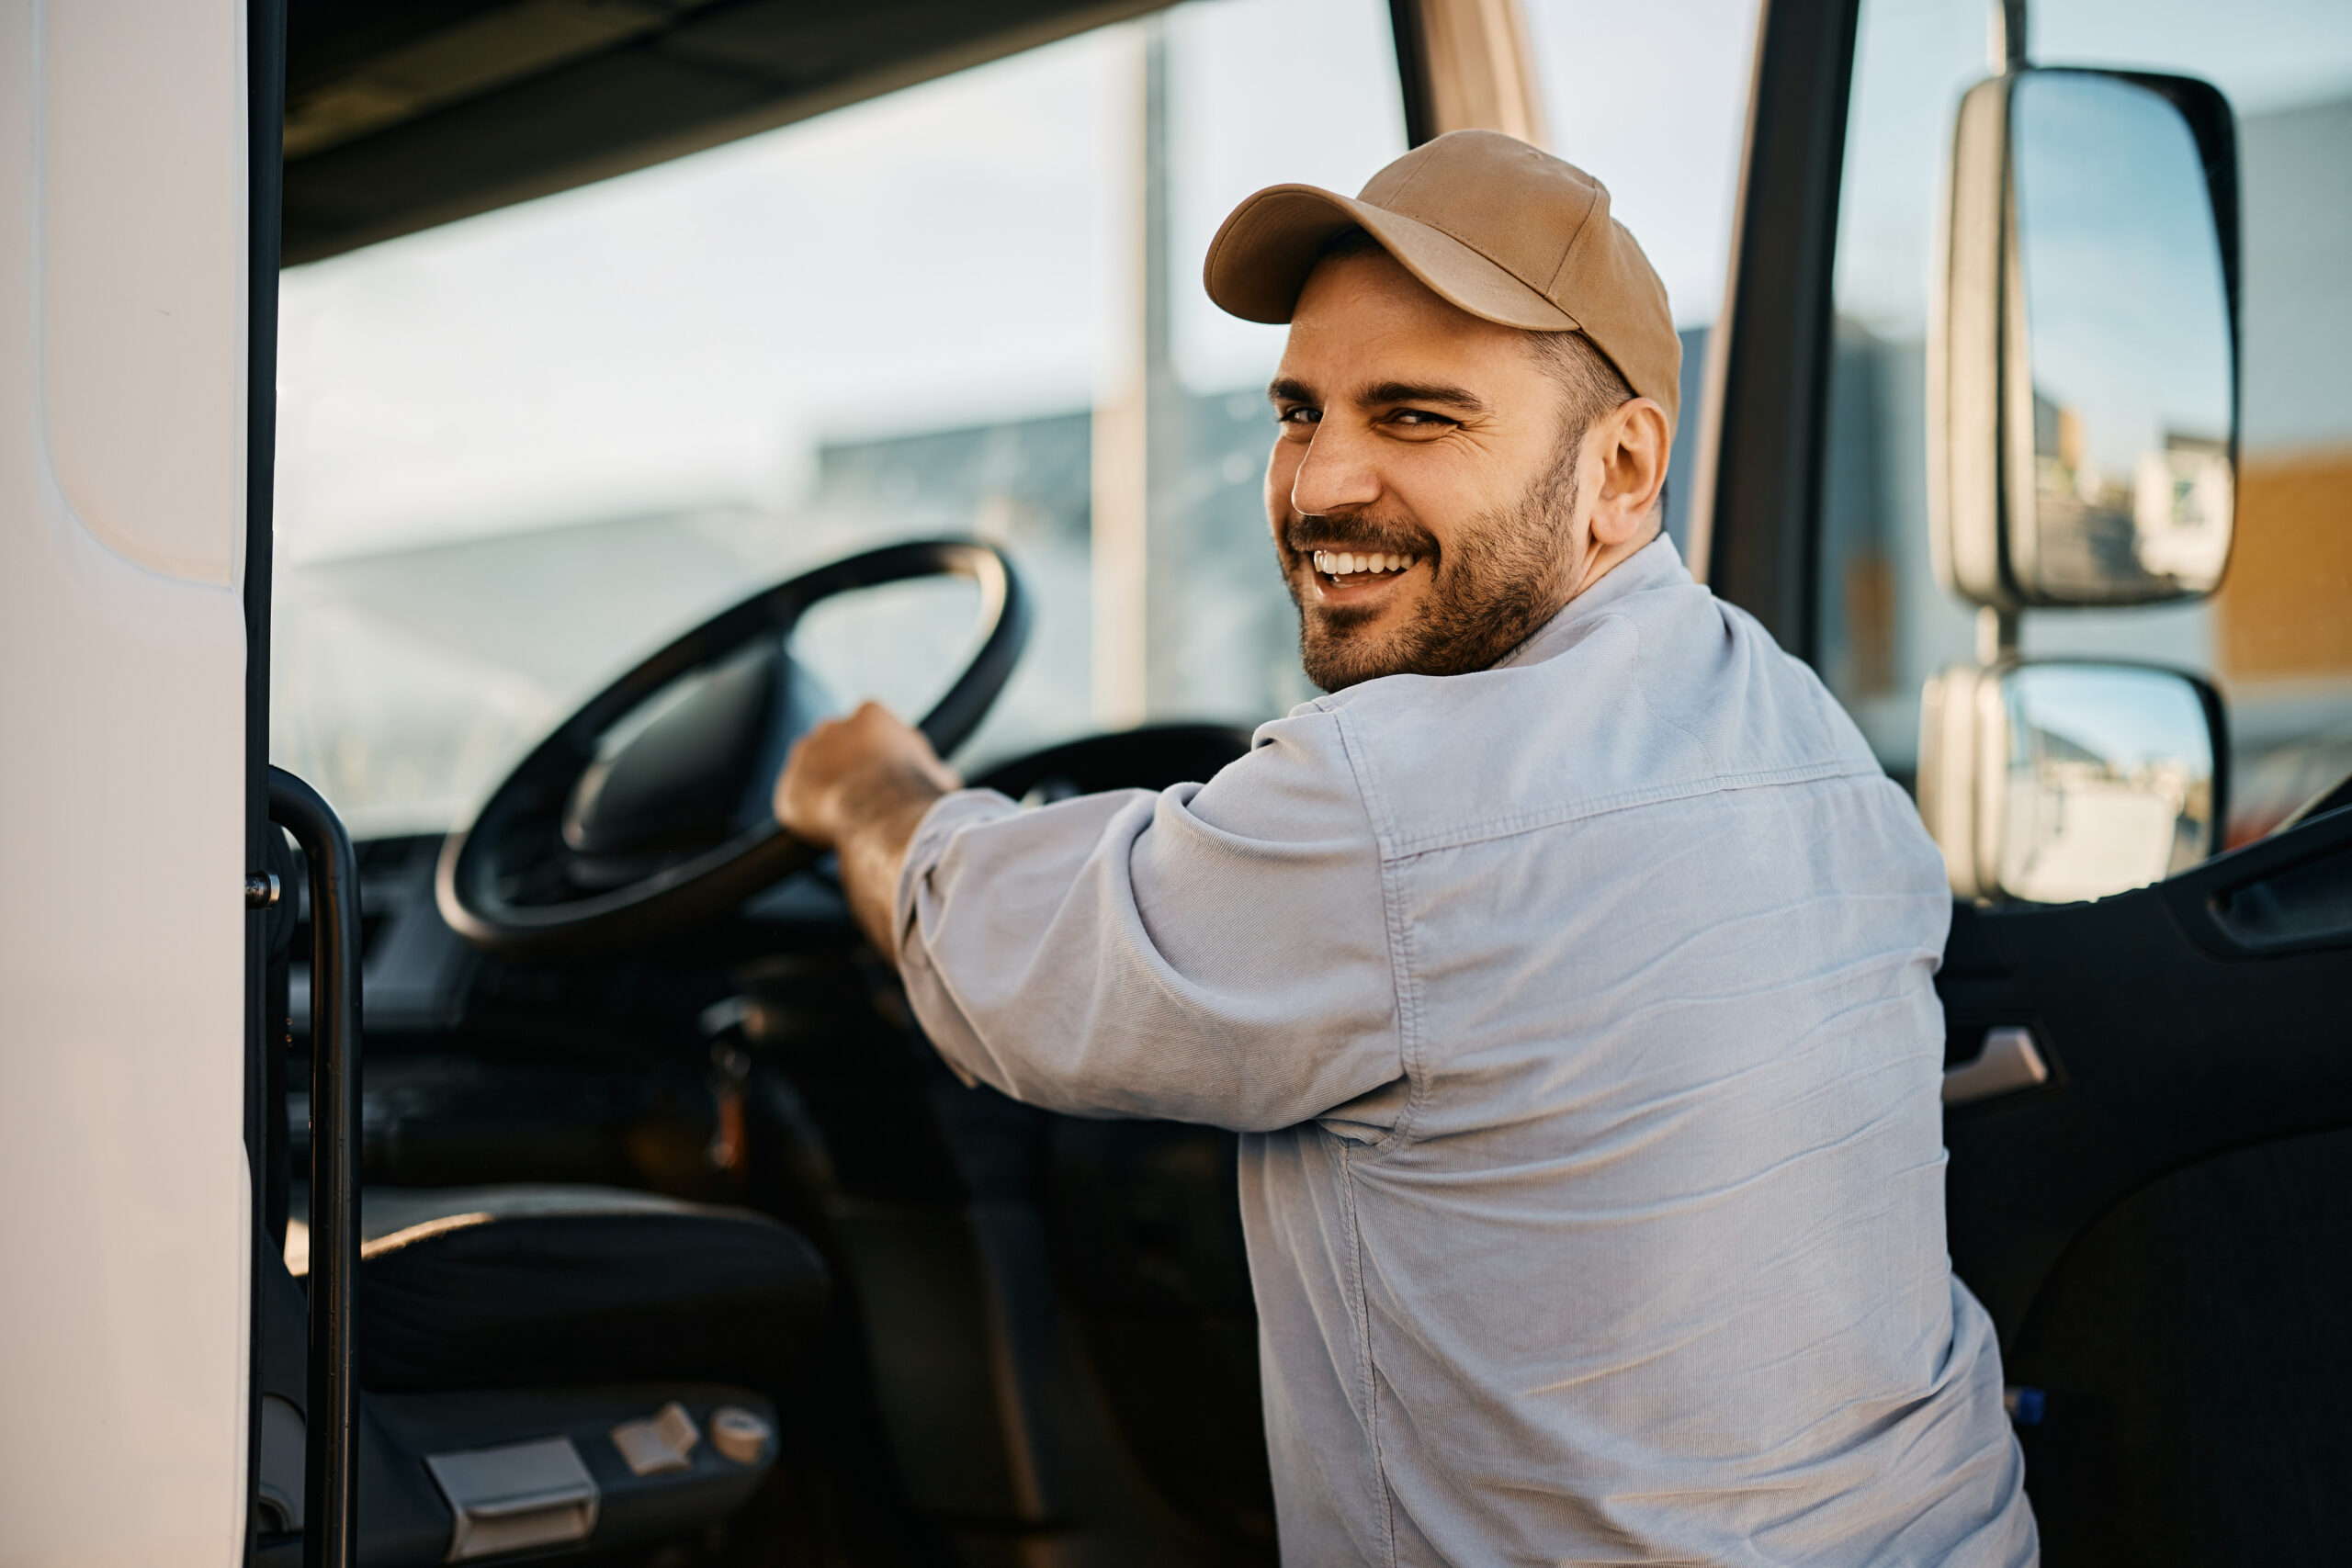 Driver fatigue – Fleet managers guide to keeping their fleet and drivers safe on the roads